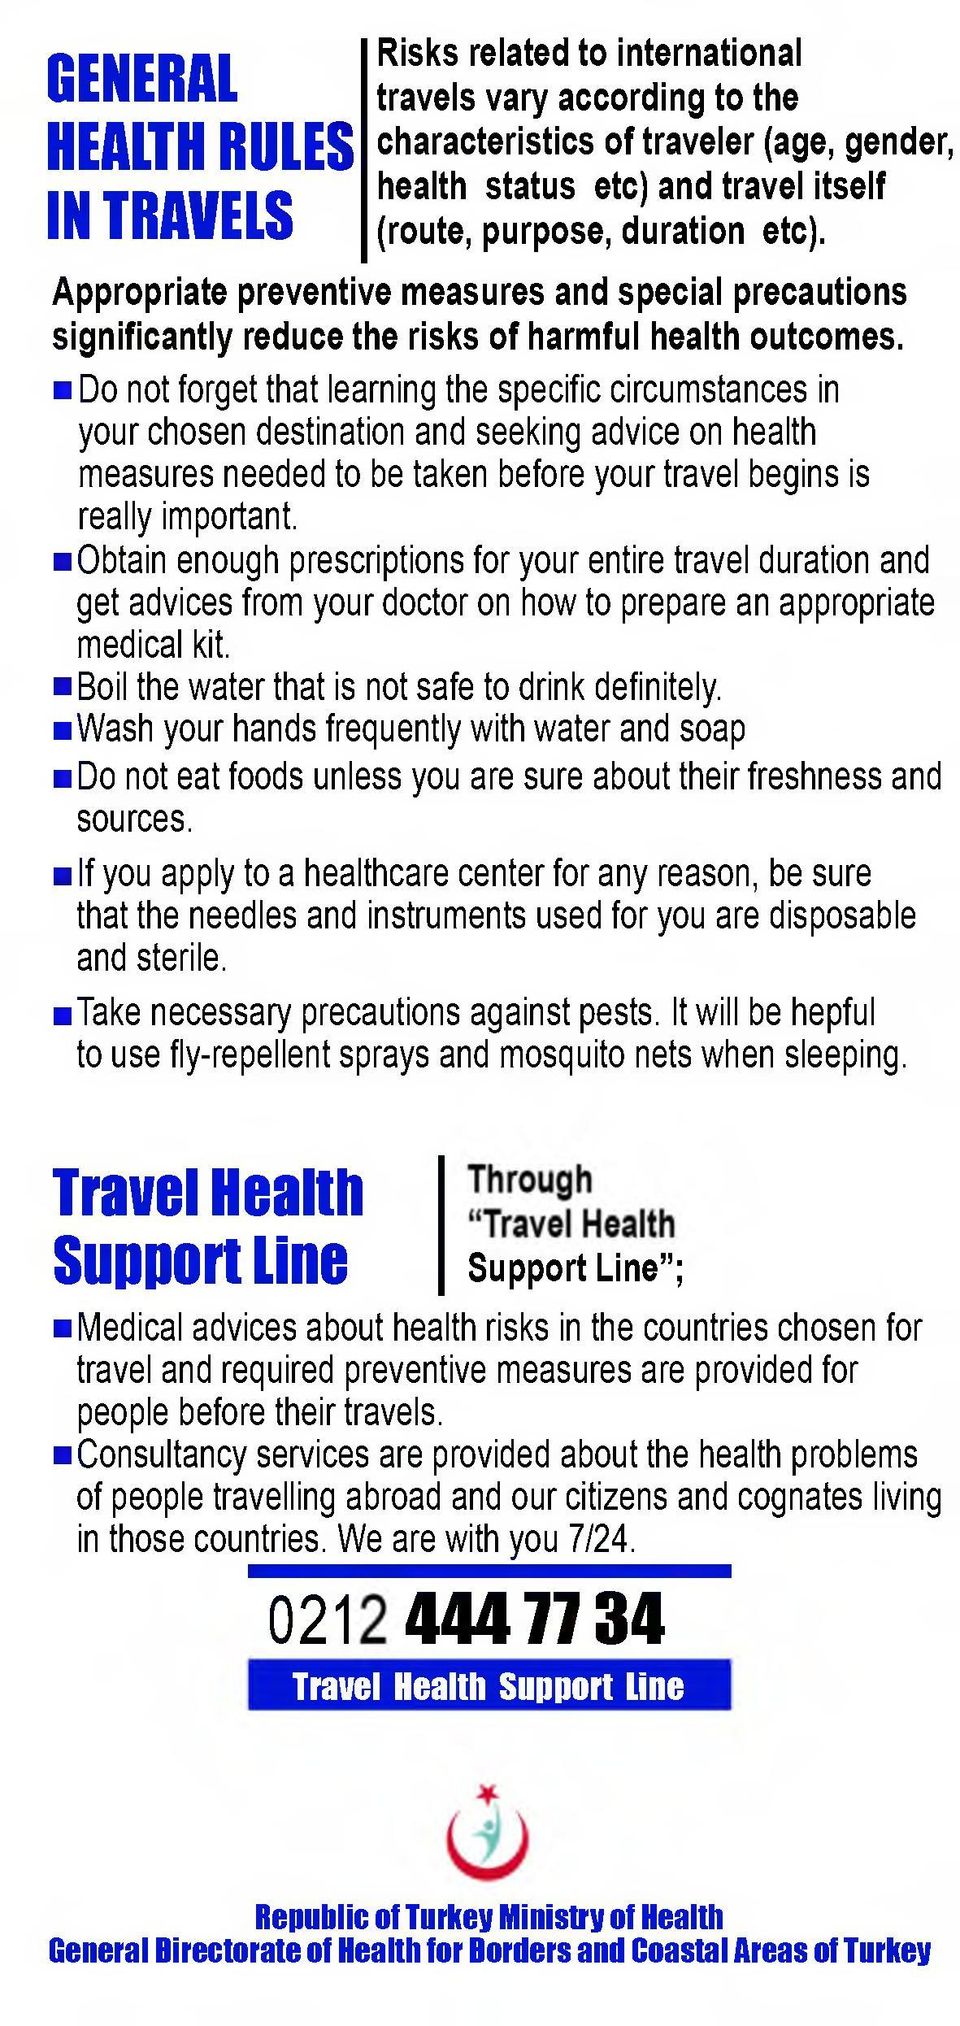 Do not forget that learning the specific circumstances in your chosen destination and seeking advice on health measures needed to be taken before your travel begins is really important.